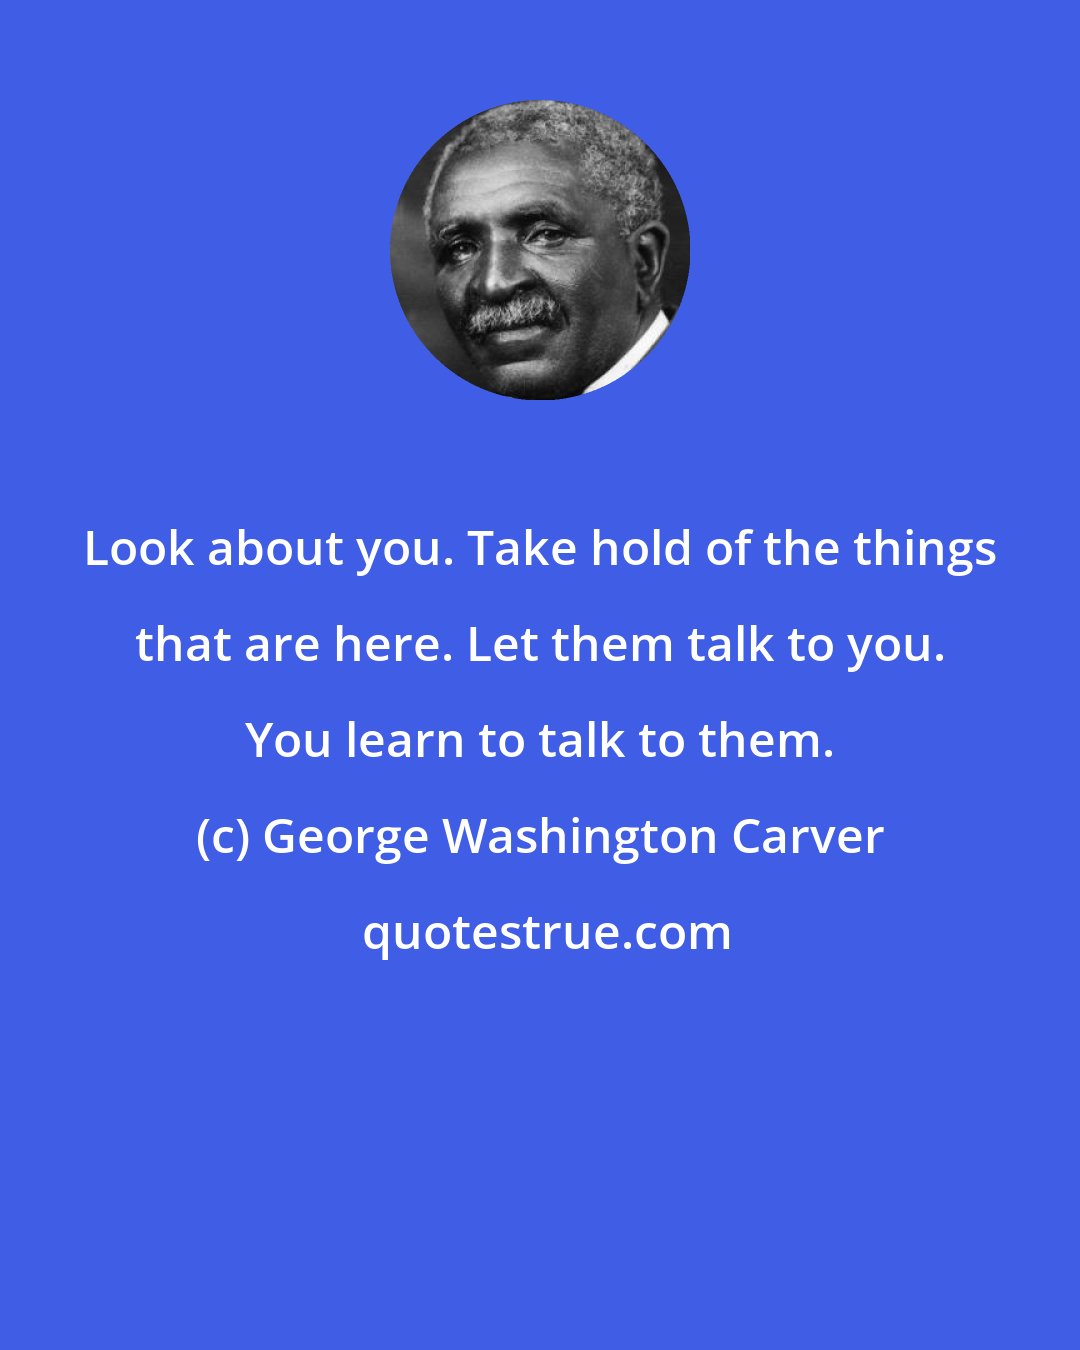 George Washington Carver: Look about you. Take hold of the things that are here. Let them talk to you. You learn to talk to them.